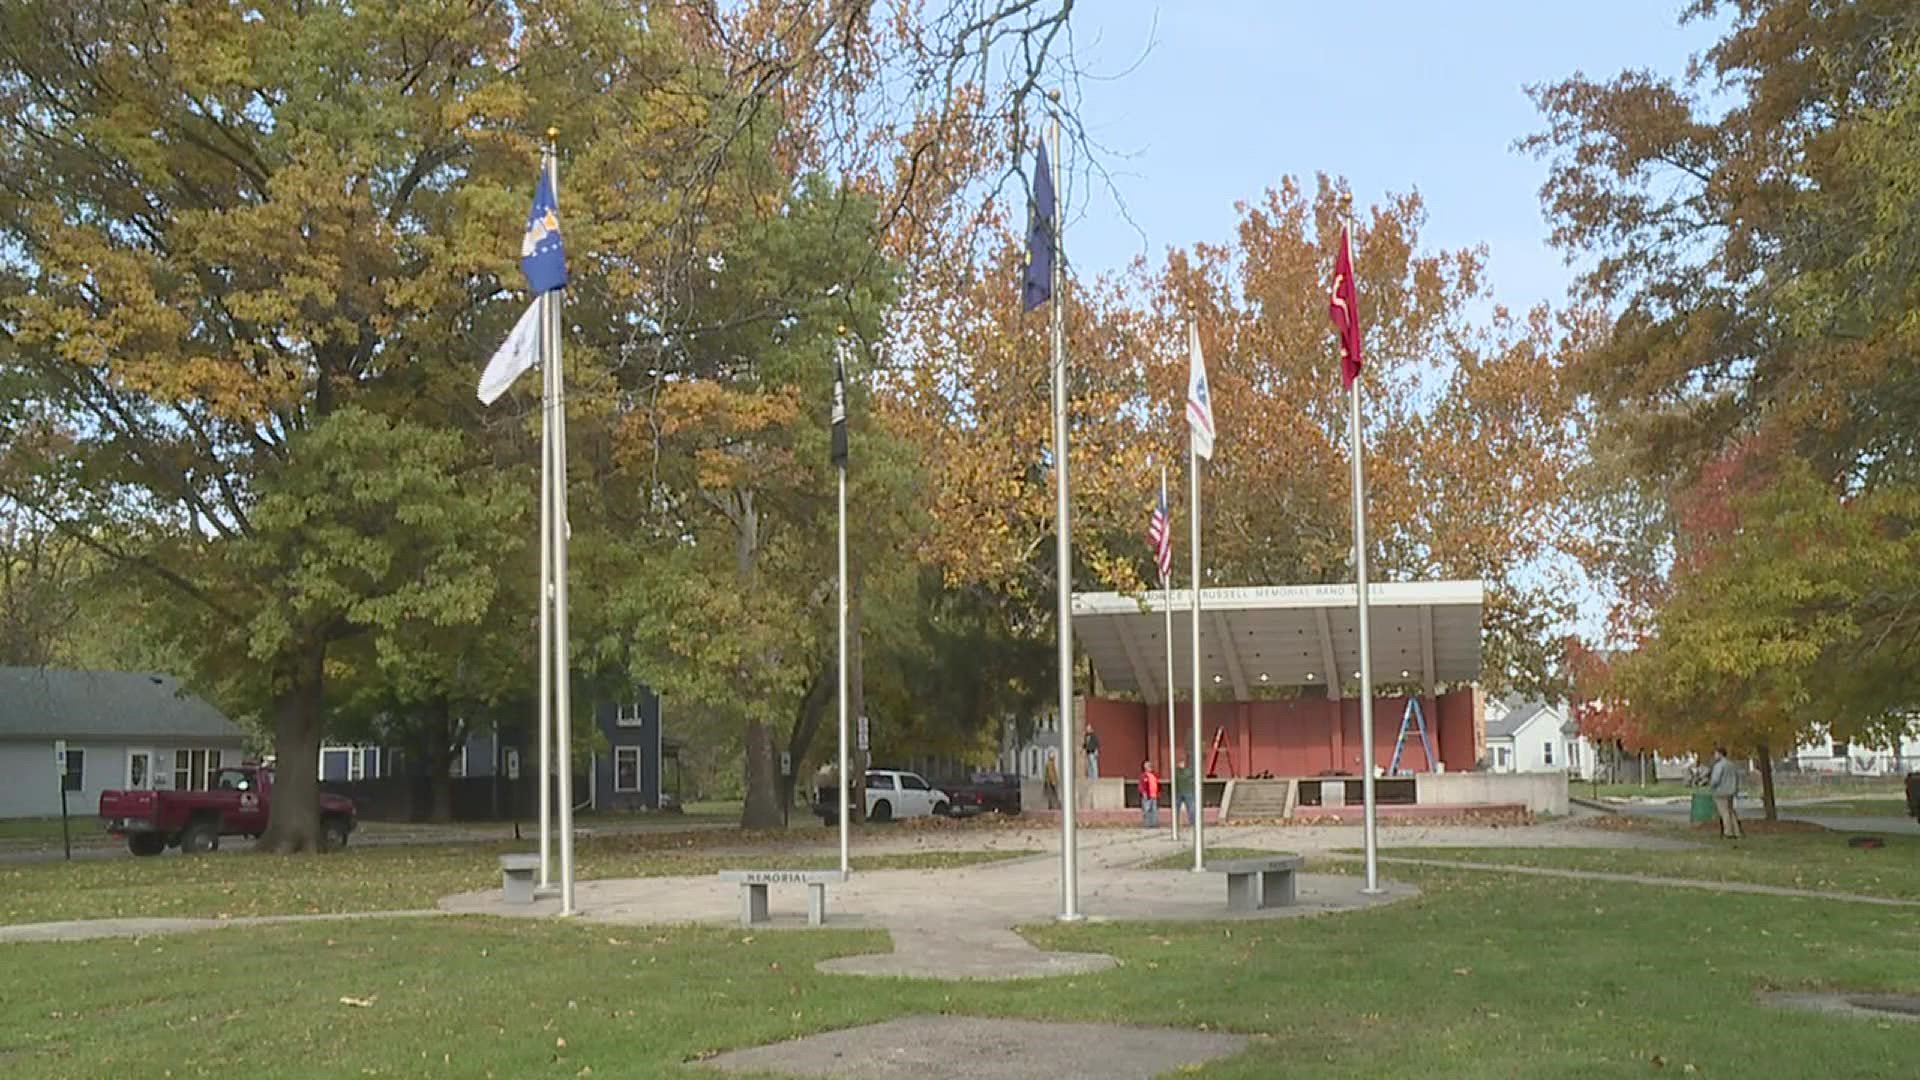 After vandals caused over $10,000 in damages to the city's Veterans Memorial Park, three officers - all veterans themselves - decided to step up and clean up.